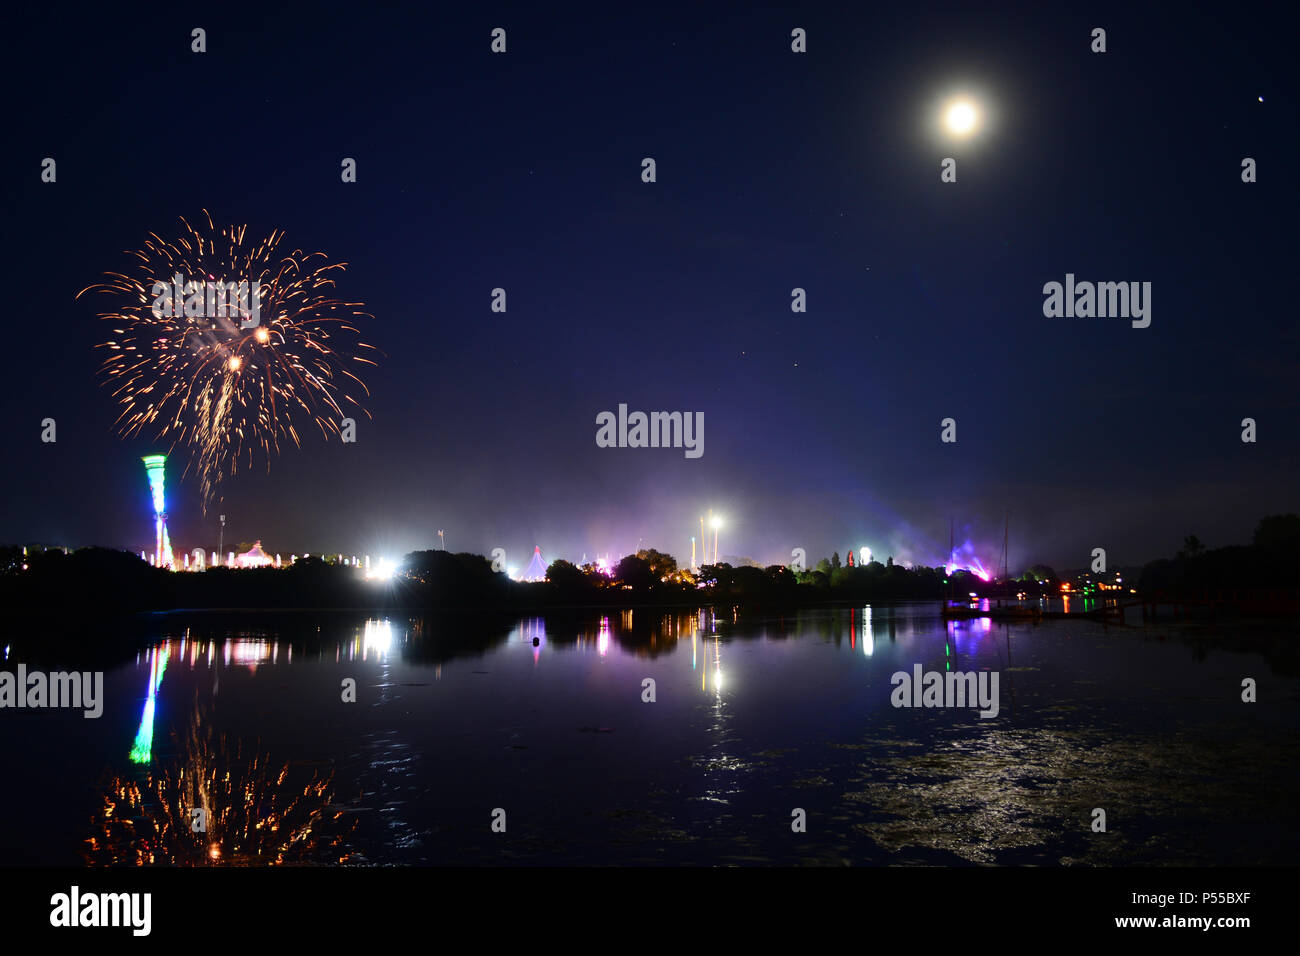 Newport, Isle of Wight, UK. 24th June, 2018. Fireworks and a near full moon herald the end of the last day of the Isle of Wight Festival as the Sunday night headliner band 'The Killers' play on the main stage, seen in the distance in blue lights. Photograph taken from the banks of the River Medina in Newport, Isle of Wight, June 24th 2018. Credit: Matthew Blythe/Alamy Live News Stock Photo